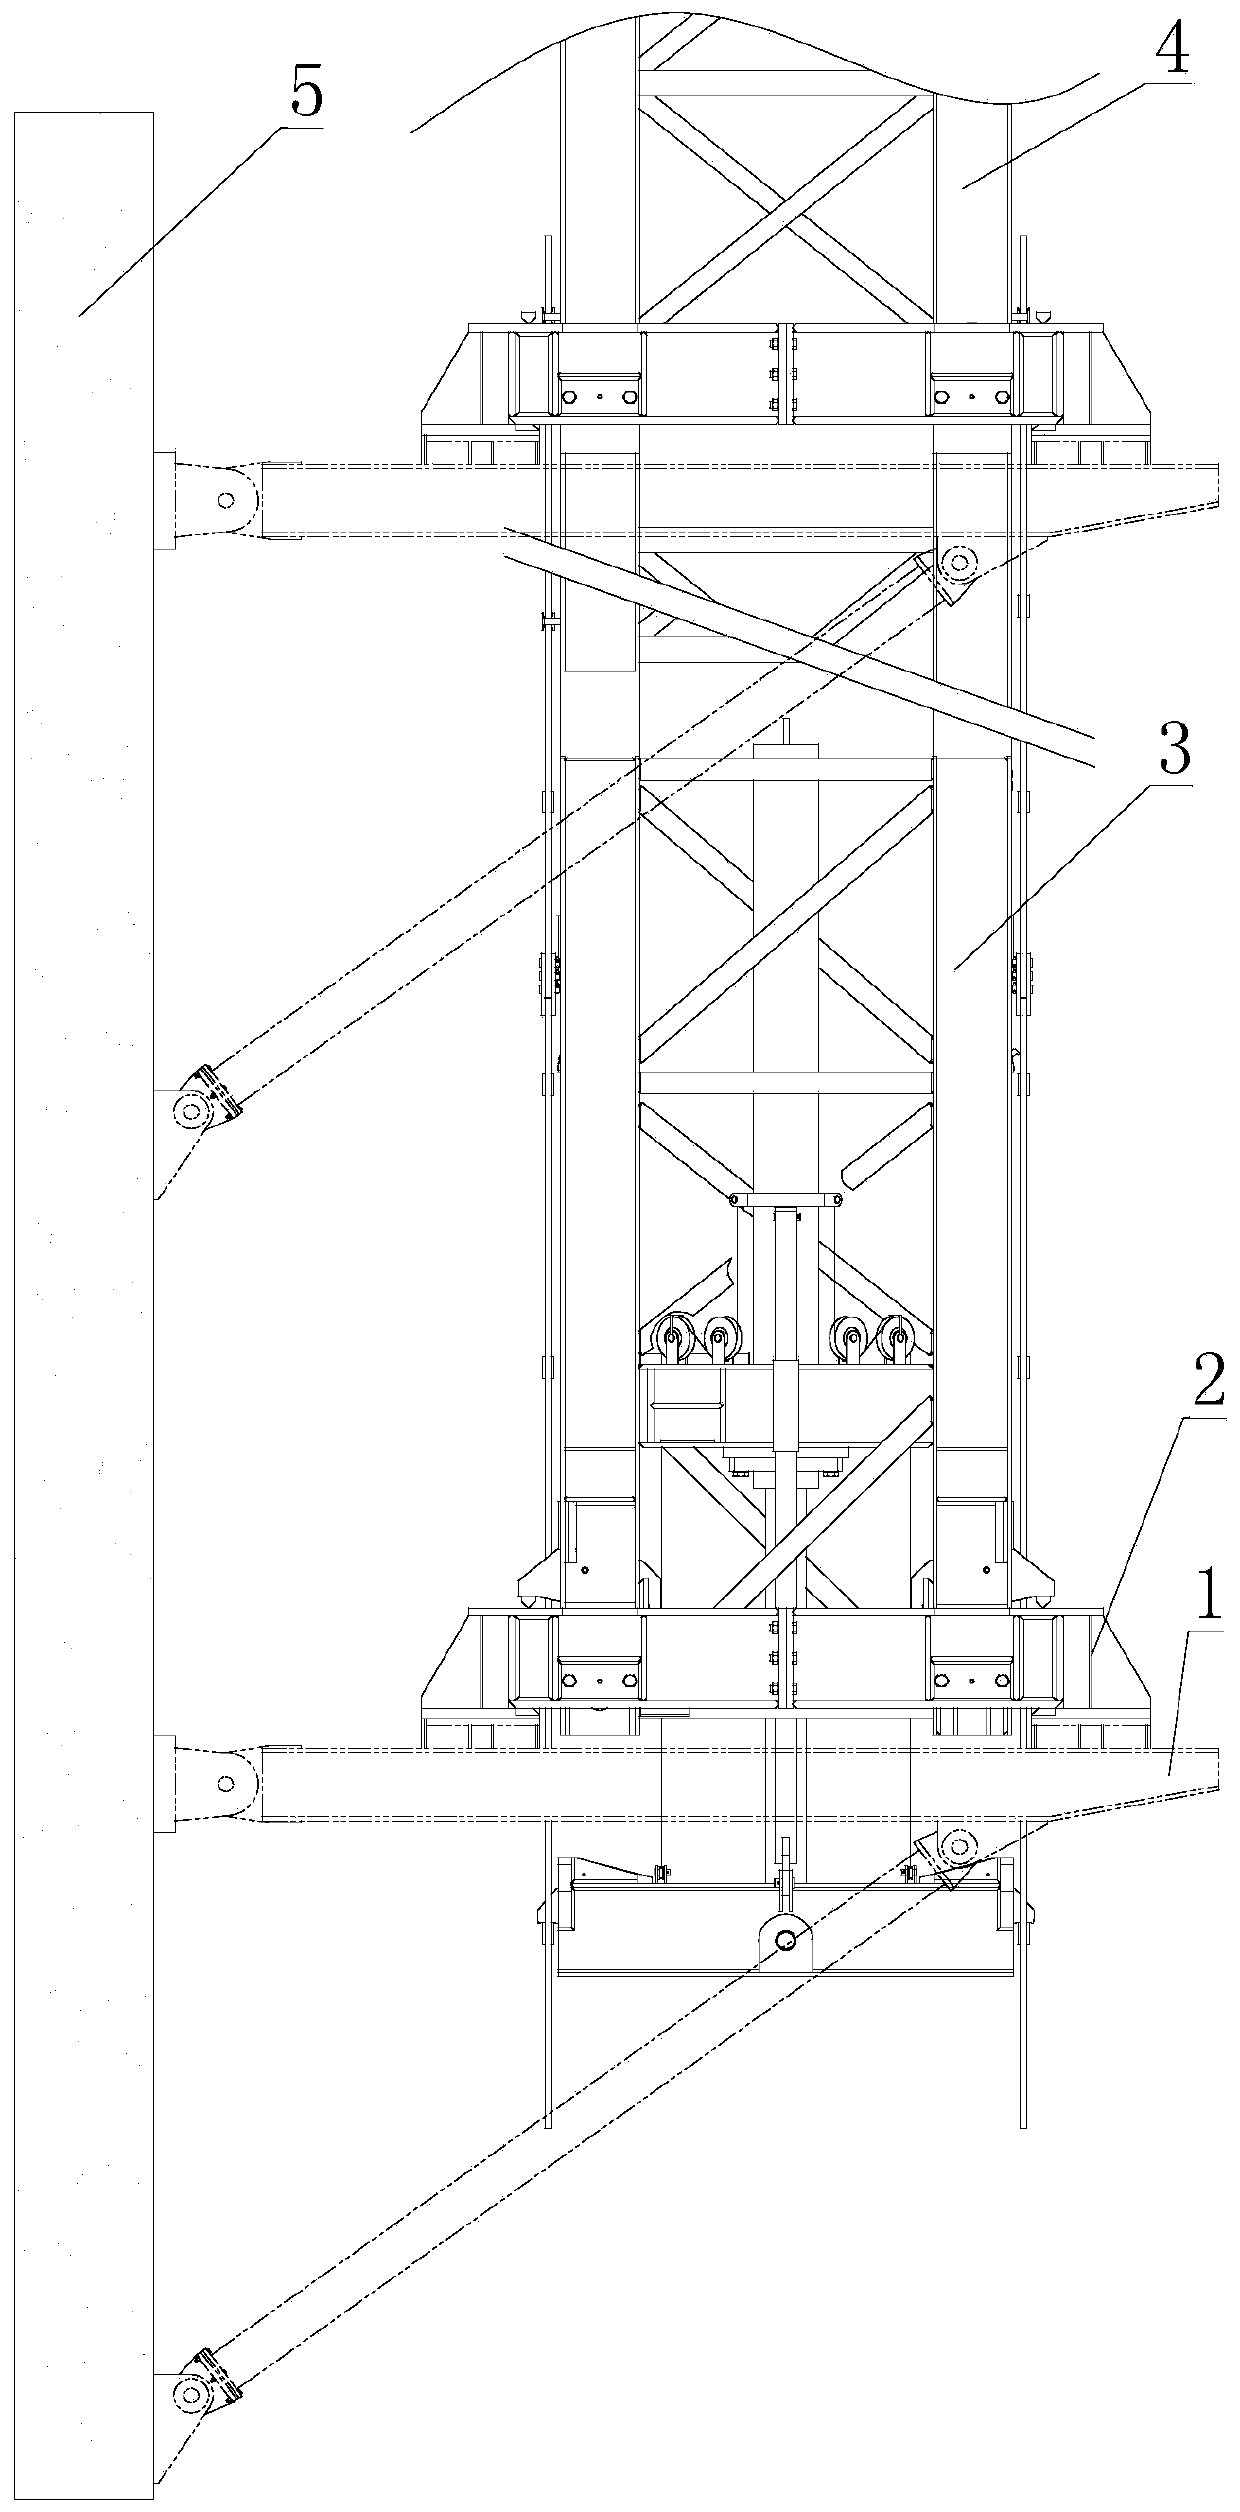 Tower crane climbing system with anti-climbing beam swing and rotation